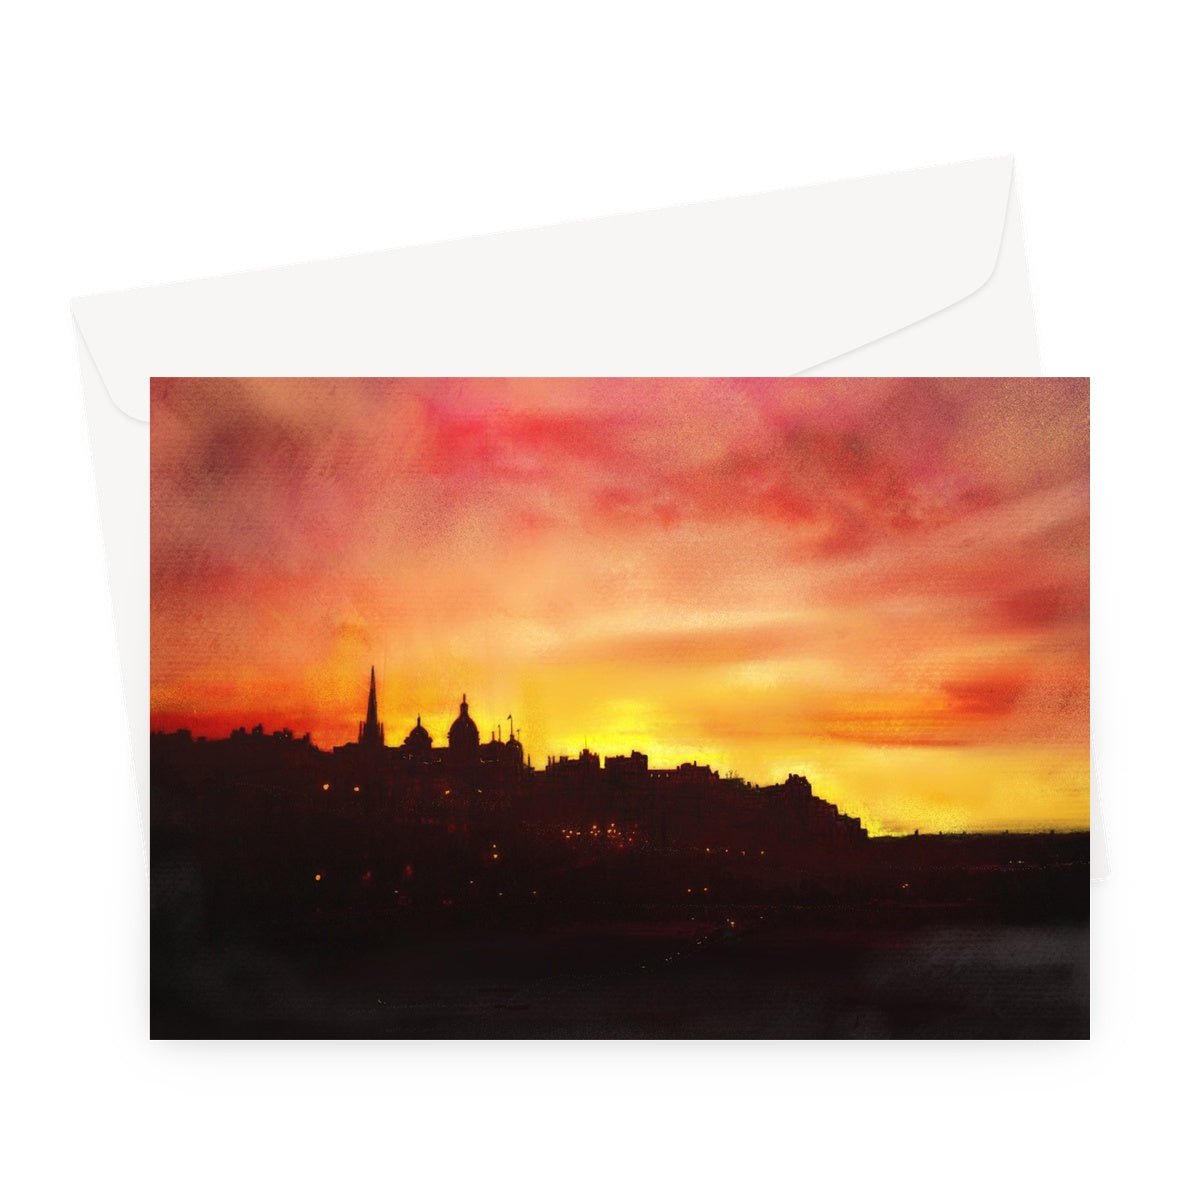 Edinburgh Sunset Art Gifts Greeting Card-Greetings Cards-Edinburgh & Glasgow Art Gallery-A5 Landscape-10 Cards-Paintings, Prints, Homeware, Art Gifts From Scotland By Scottish Artist Kevin Hunter